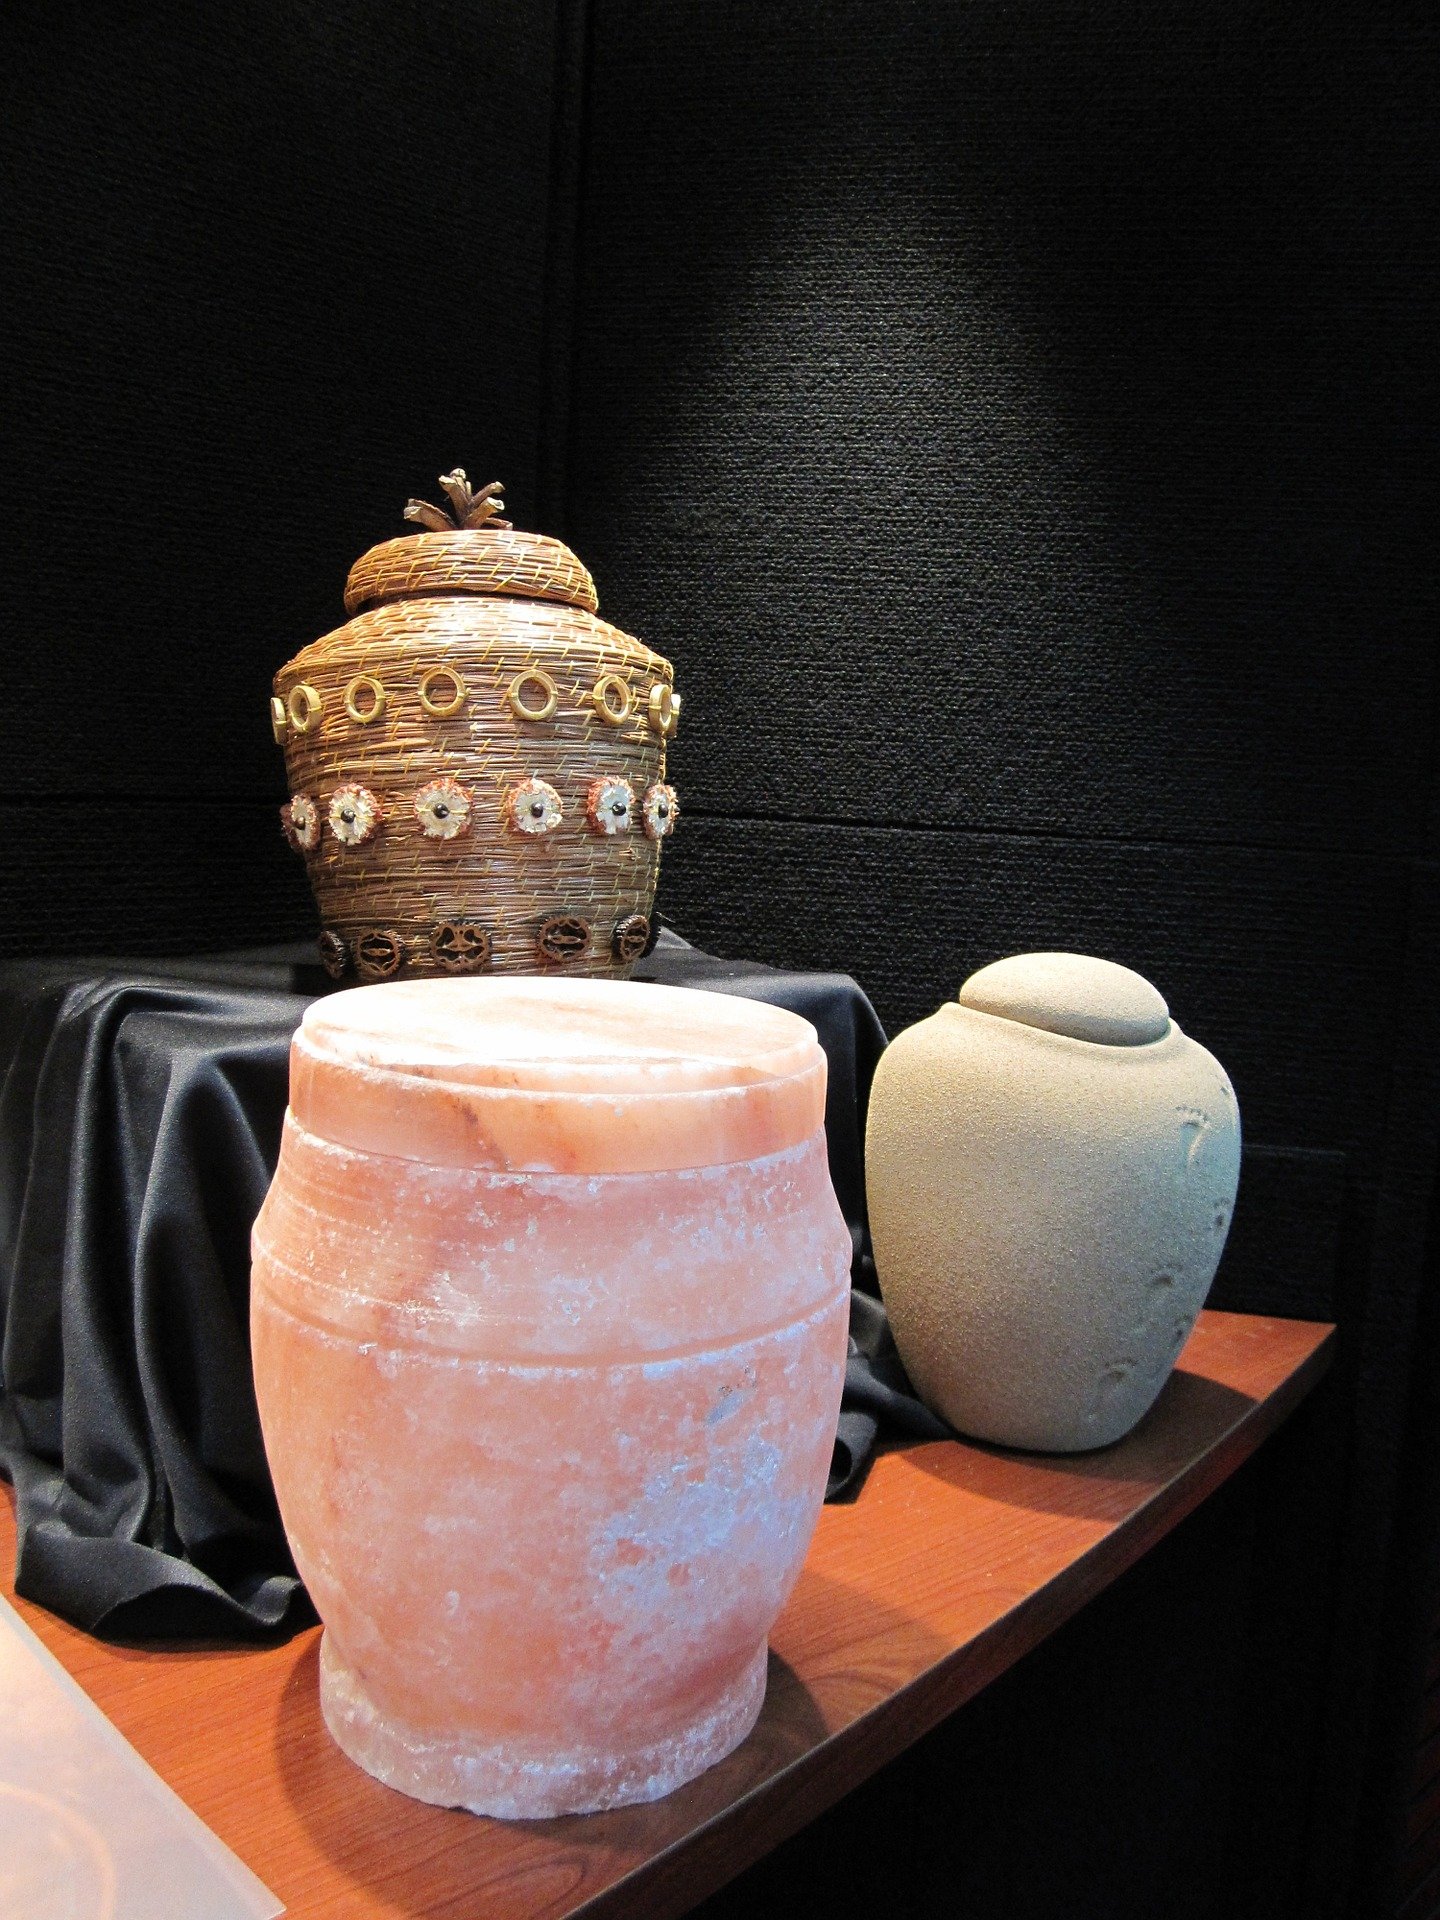 Pictured - Three different types of urns placed on a brown table | Source: Pixabay 